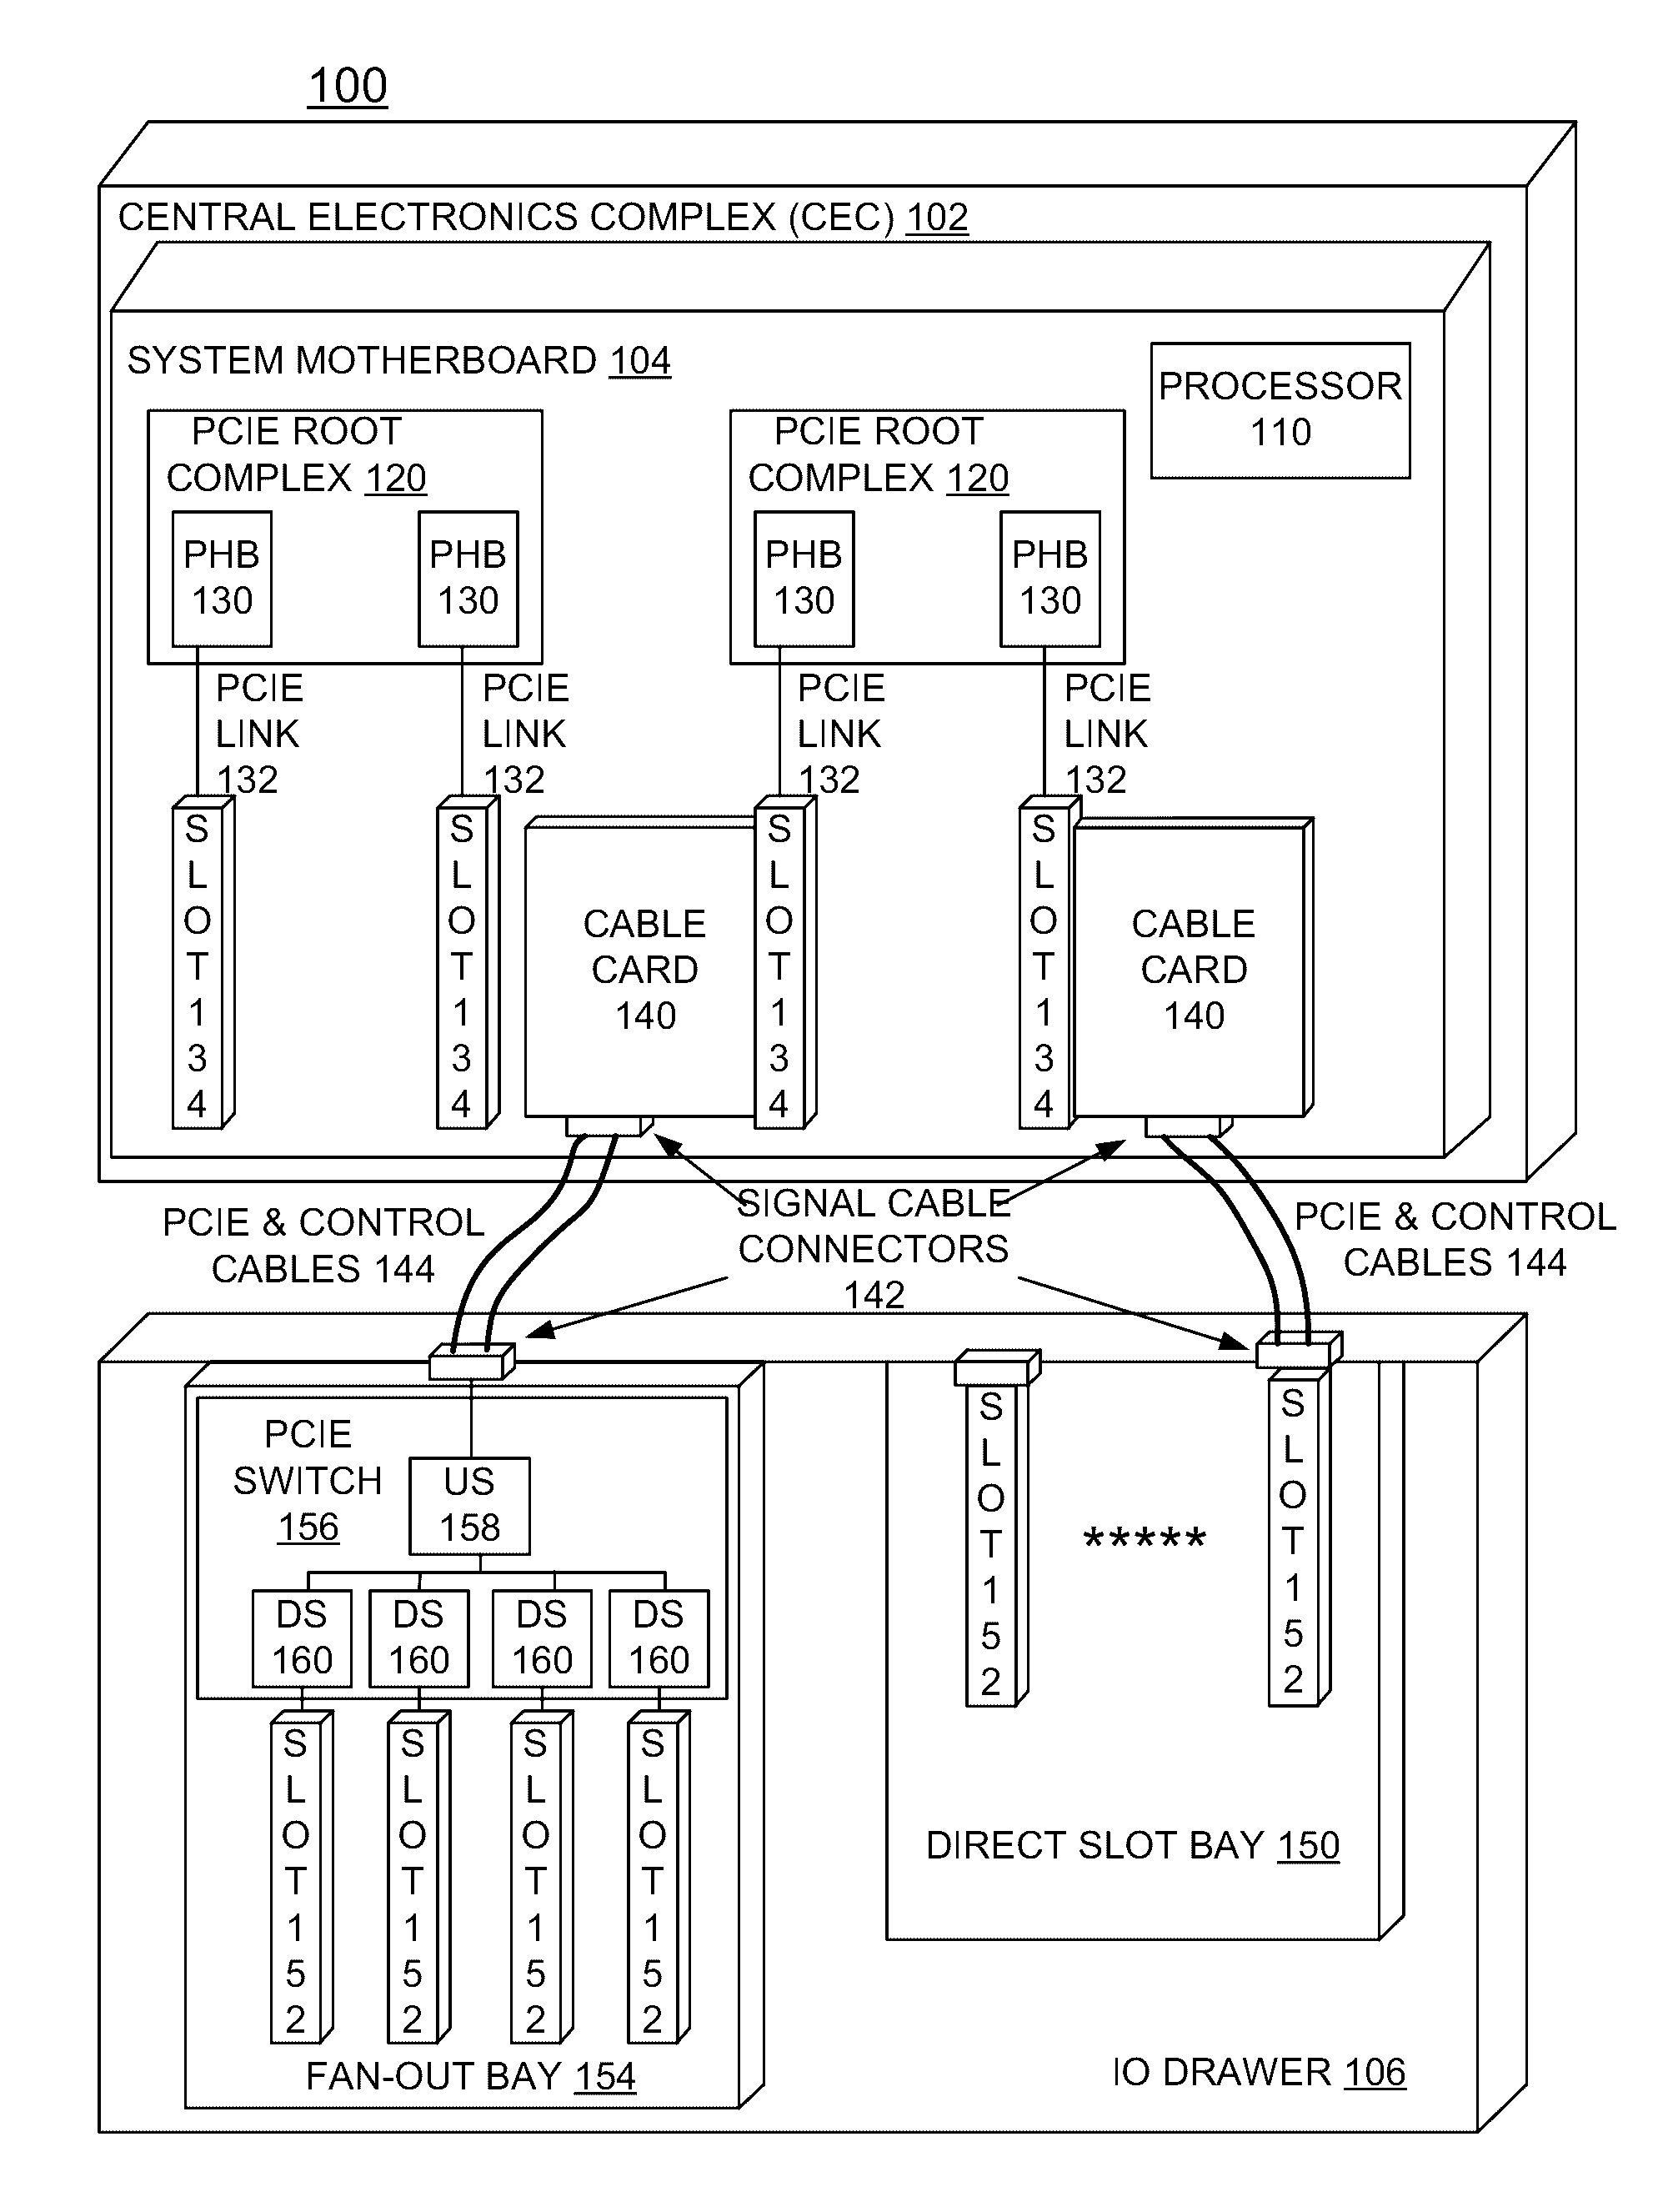 Detecting and sparing of optical PCIE cable channel attached IO drawer